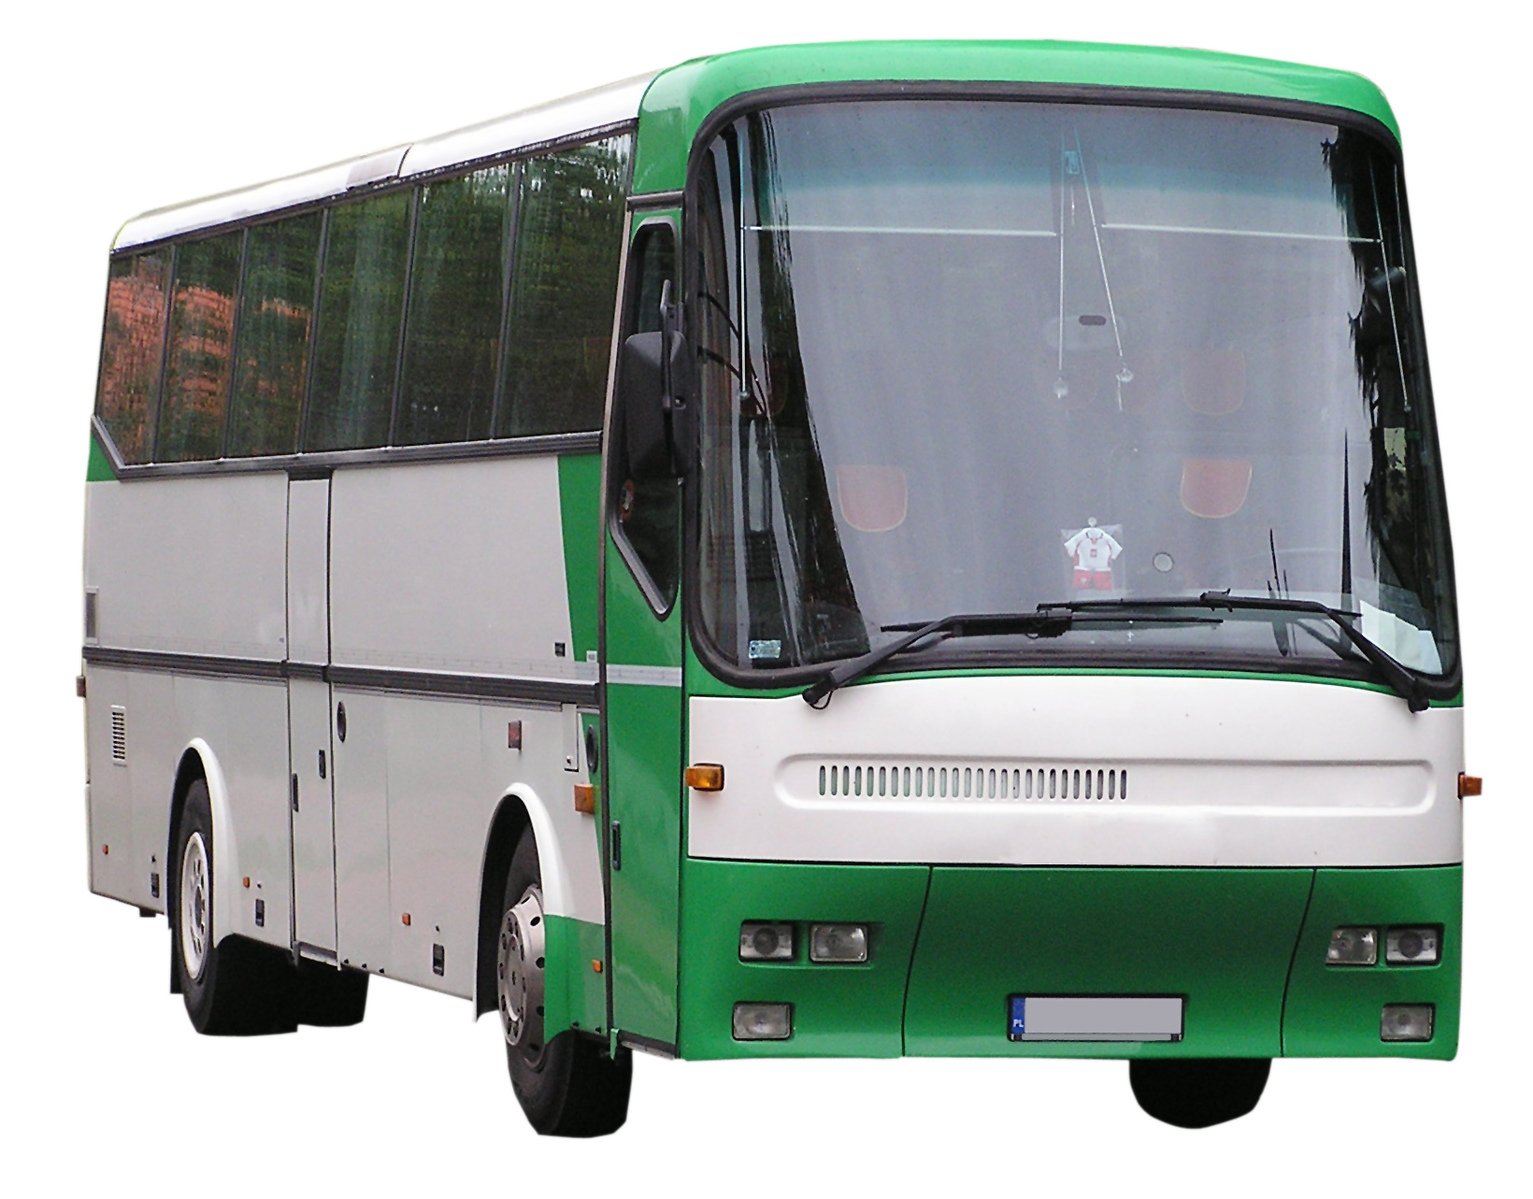 a green and white bus with several seats